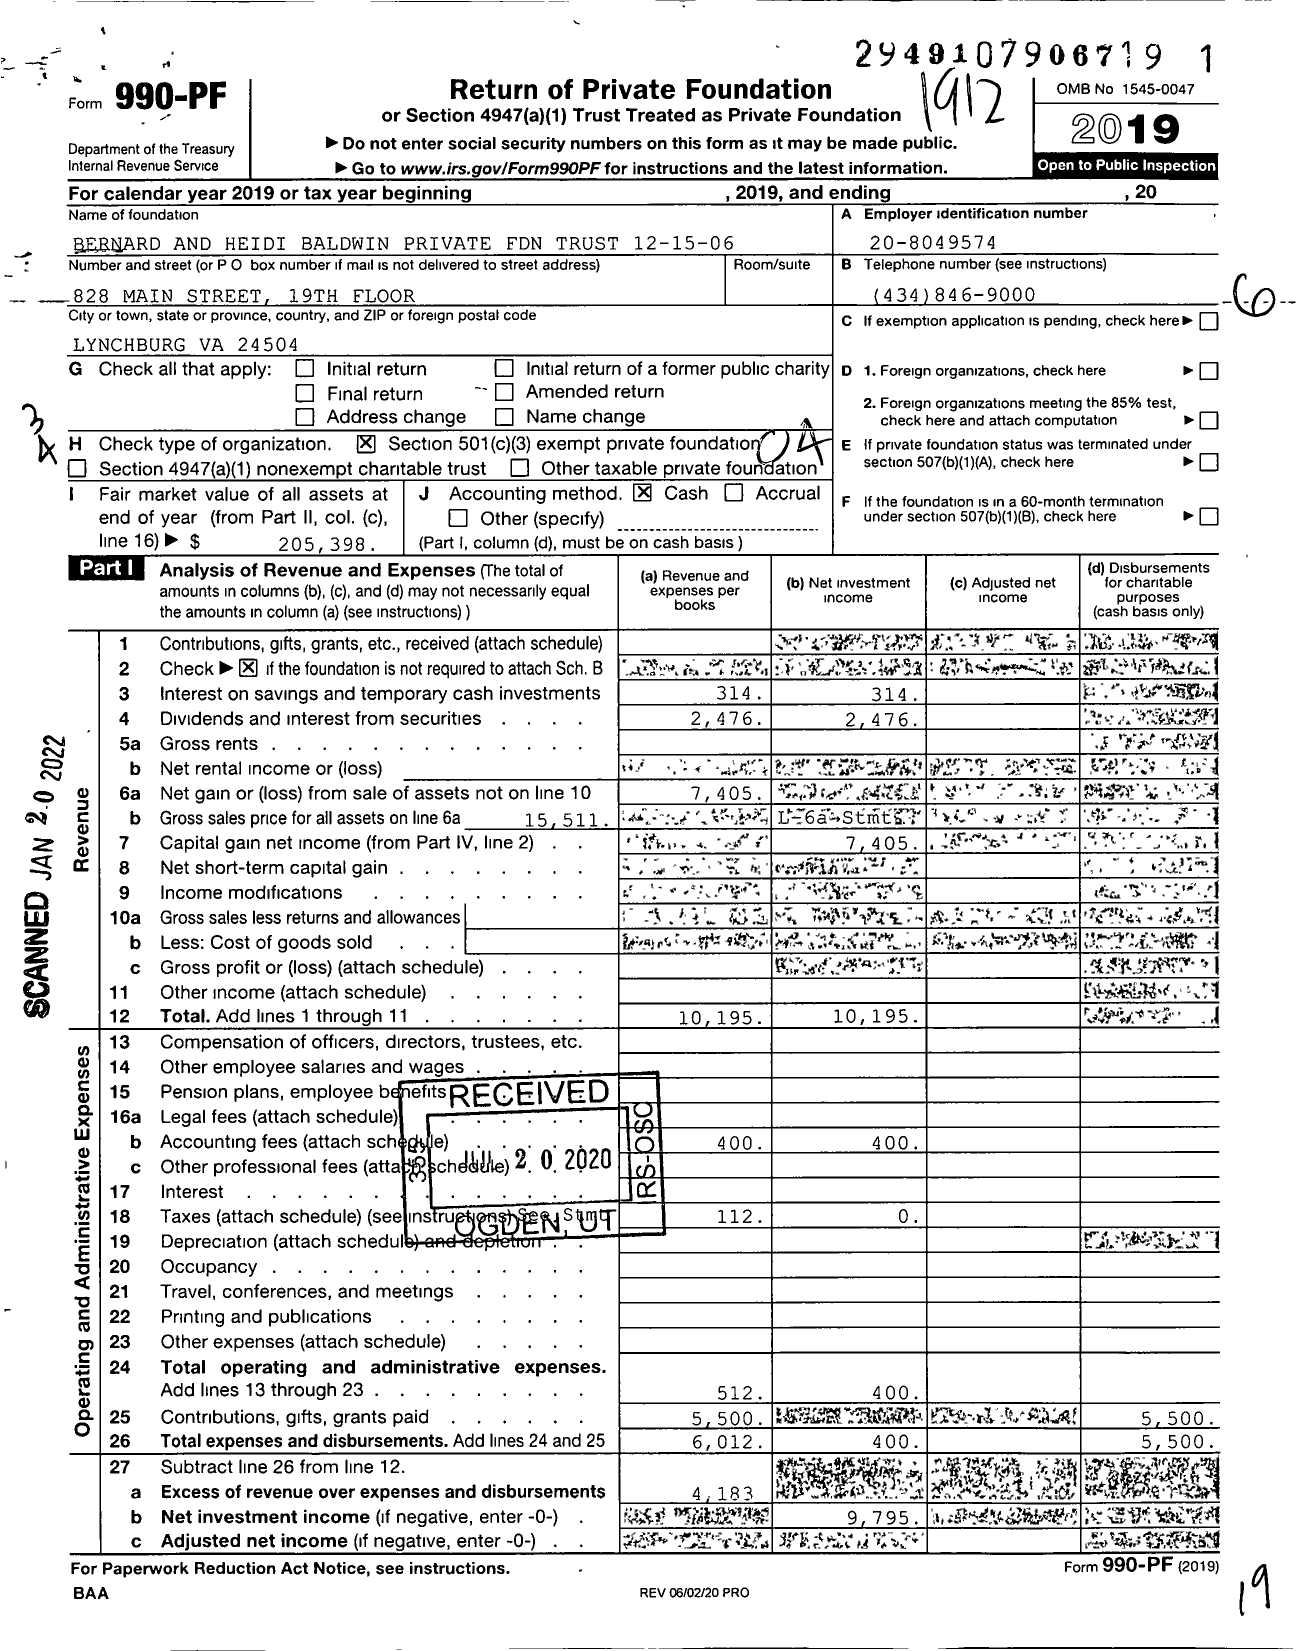 Image of first page of 2019 Form 990PF for Bernard and Heidi Baldwin Private Foundation Trust 12-15-06